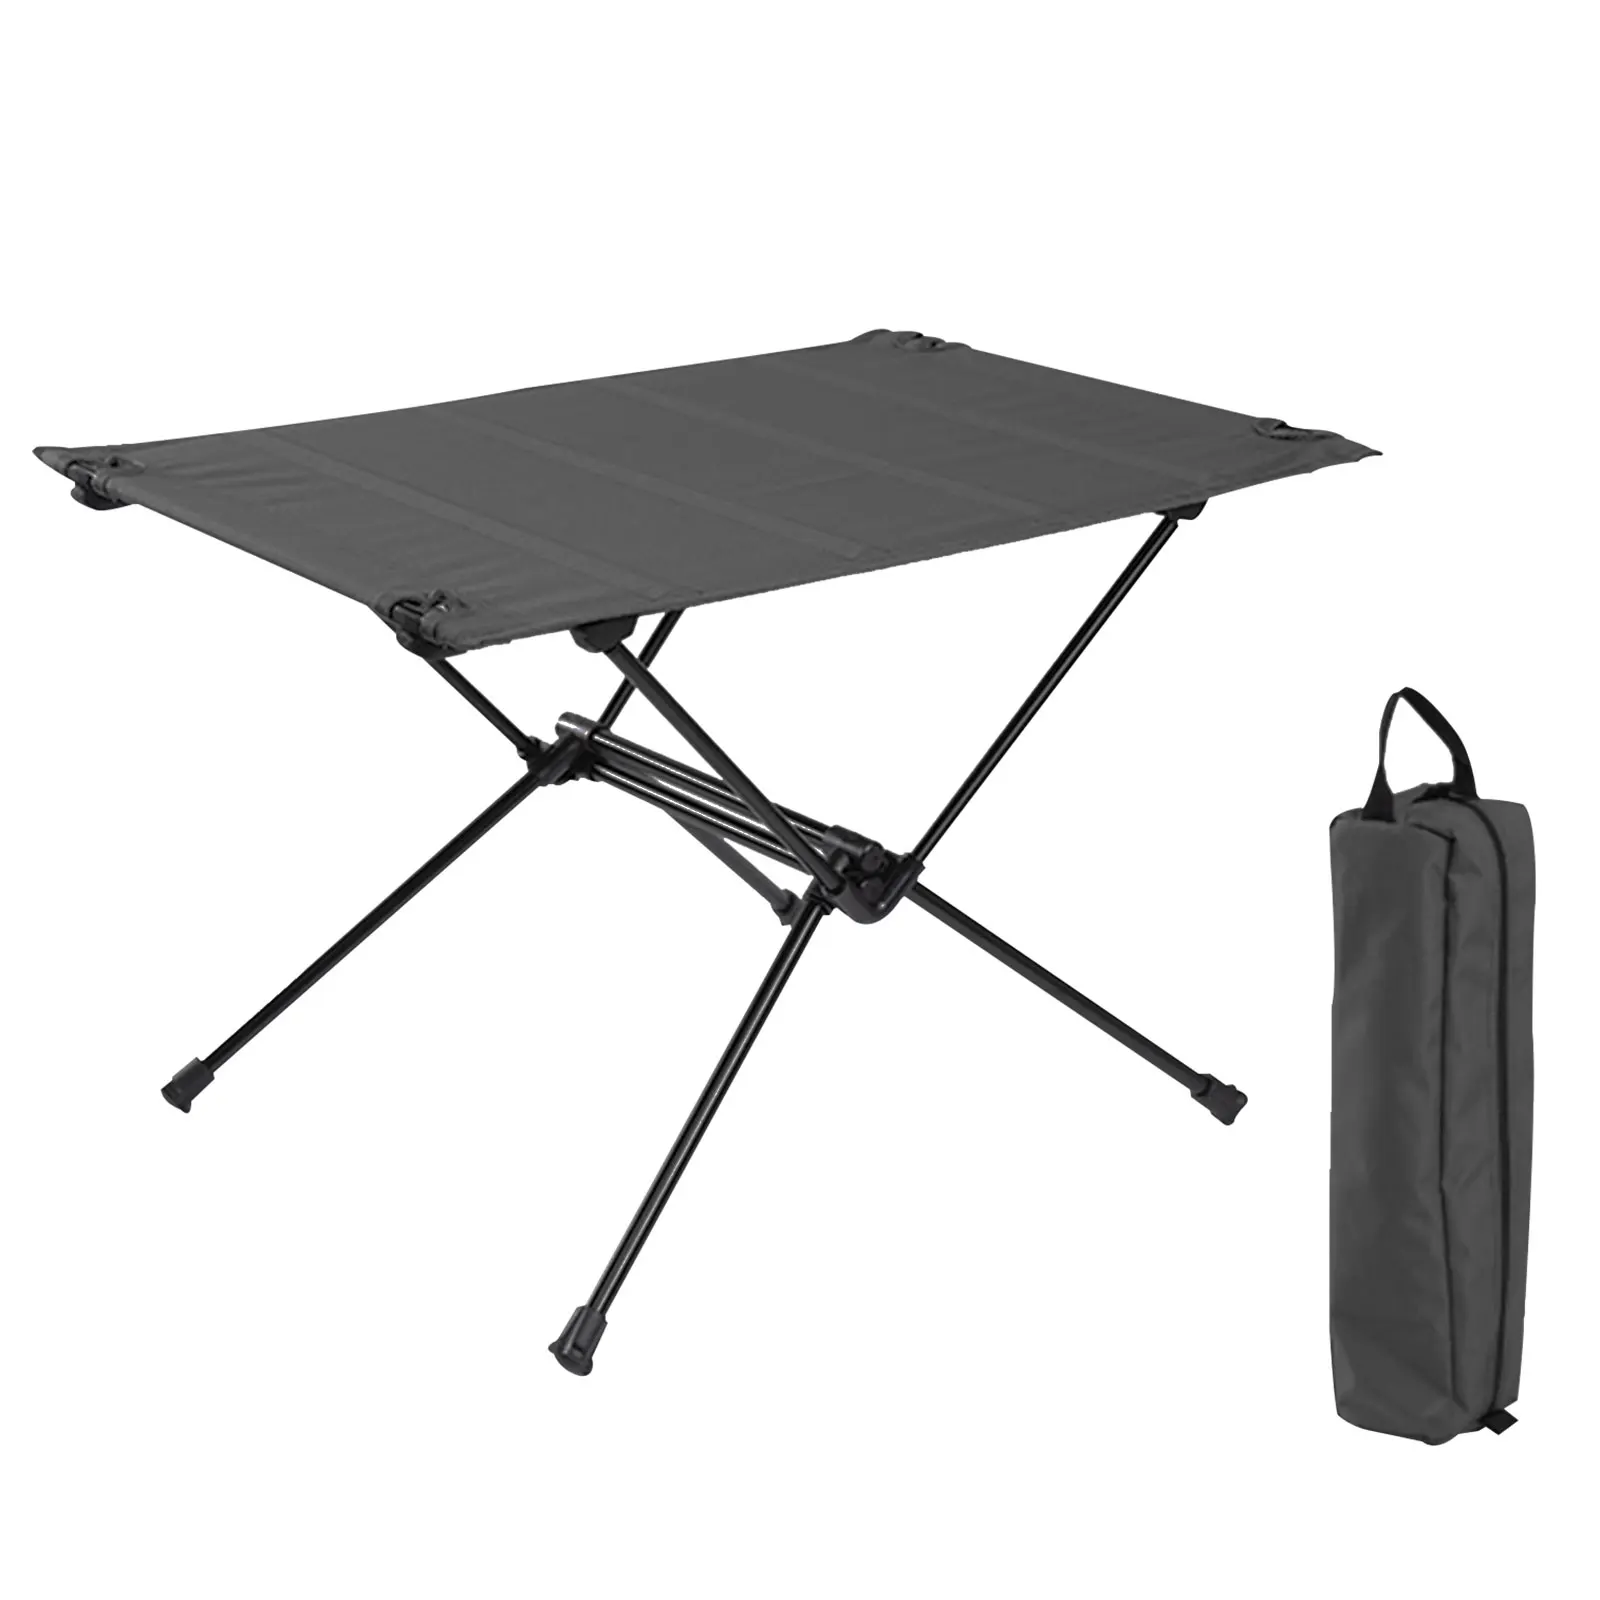 Foldable Camping Table-Aluminum Lightweight Folding Table Compact Roll Up Tables Collapsible Table for Fishing Picnic BBQ 1